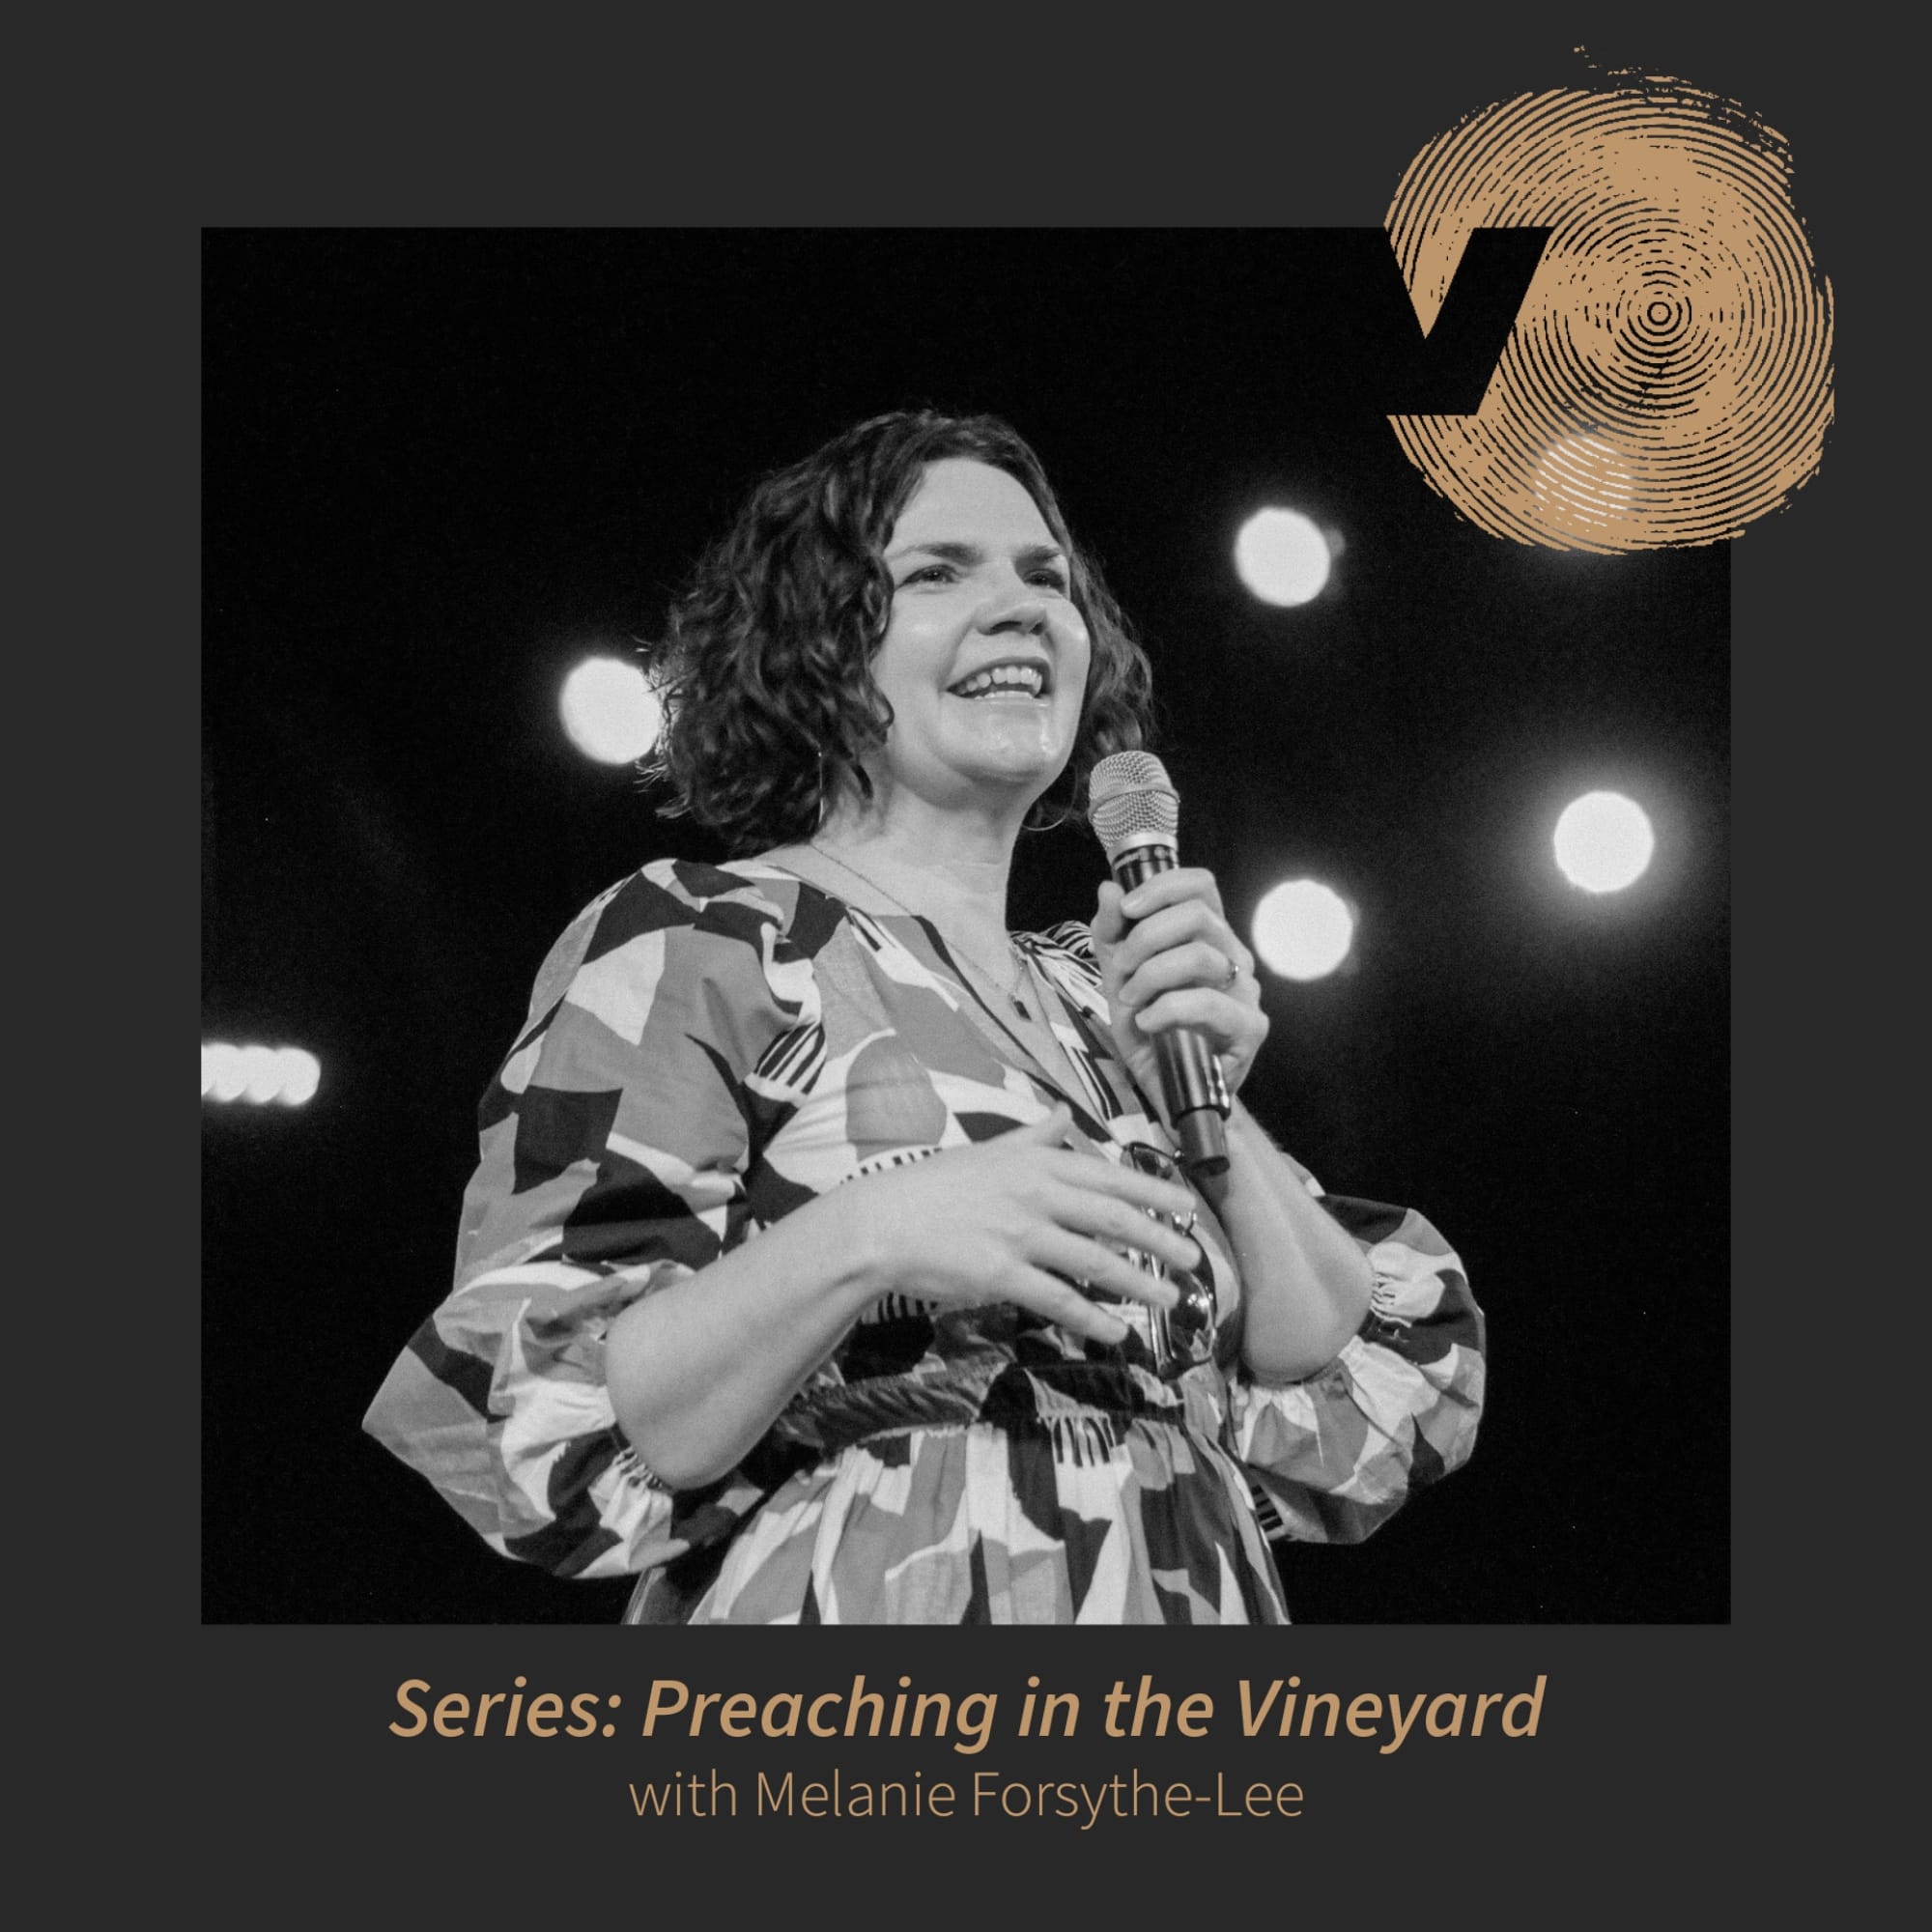 Preaching In The Vineyard: Women Who Preach with Melanie Forsythe-Lee